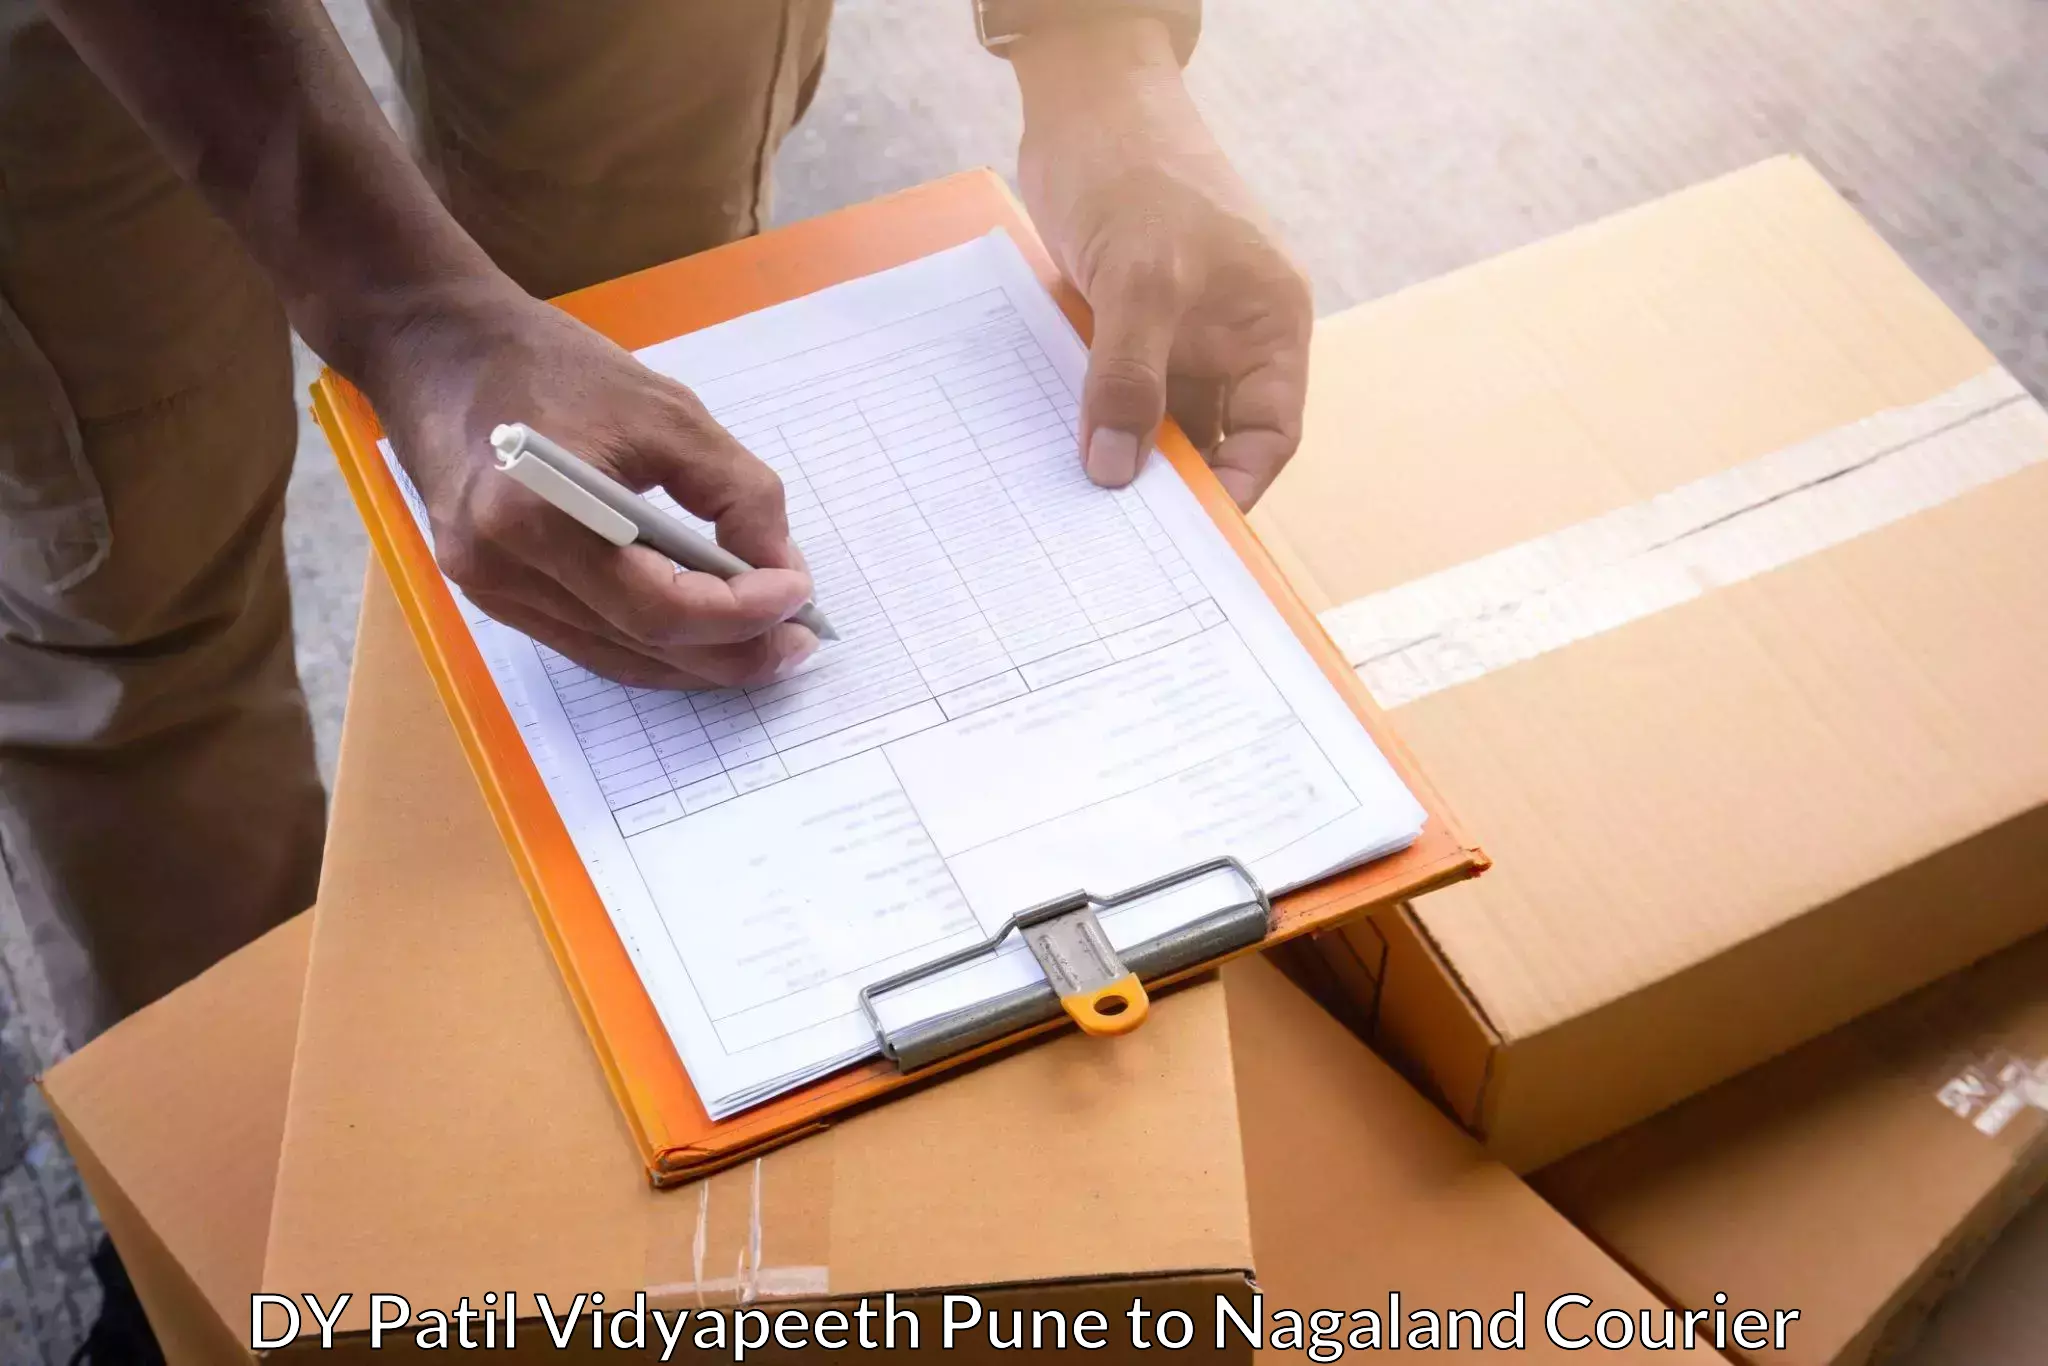 On-call courier service DY Patil Vidyapeeth Pune to Tuensang